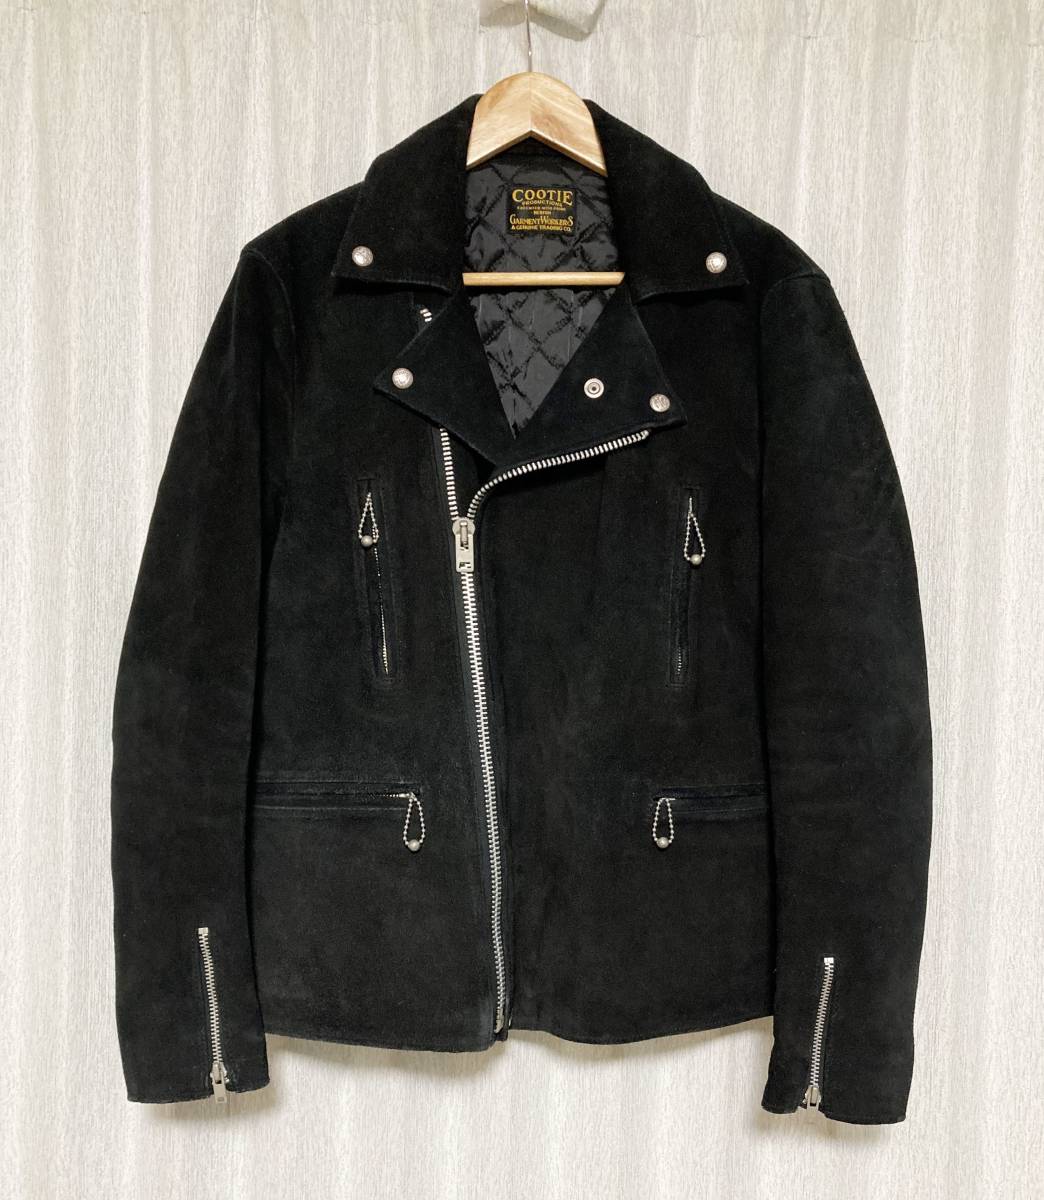 [COOTIE] 16AW 定価143,000 3RD ST SUEDE LEATHER JACKET ダブルライダース スウェードレザージャケット M 牛革 ブラック クーティ